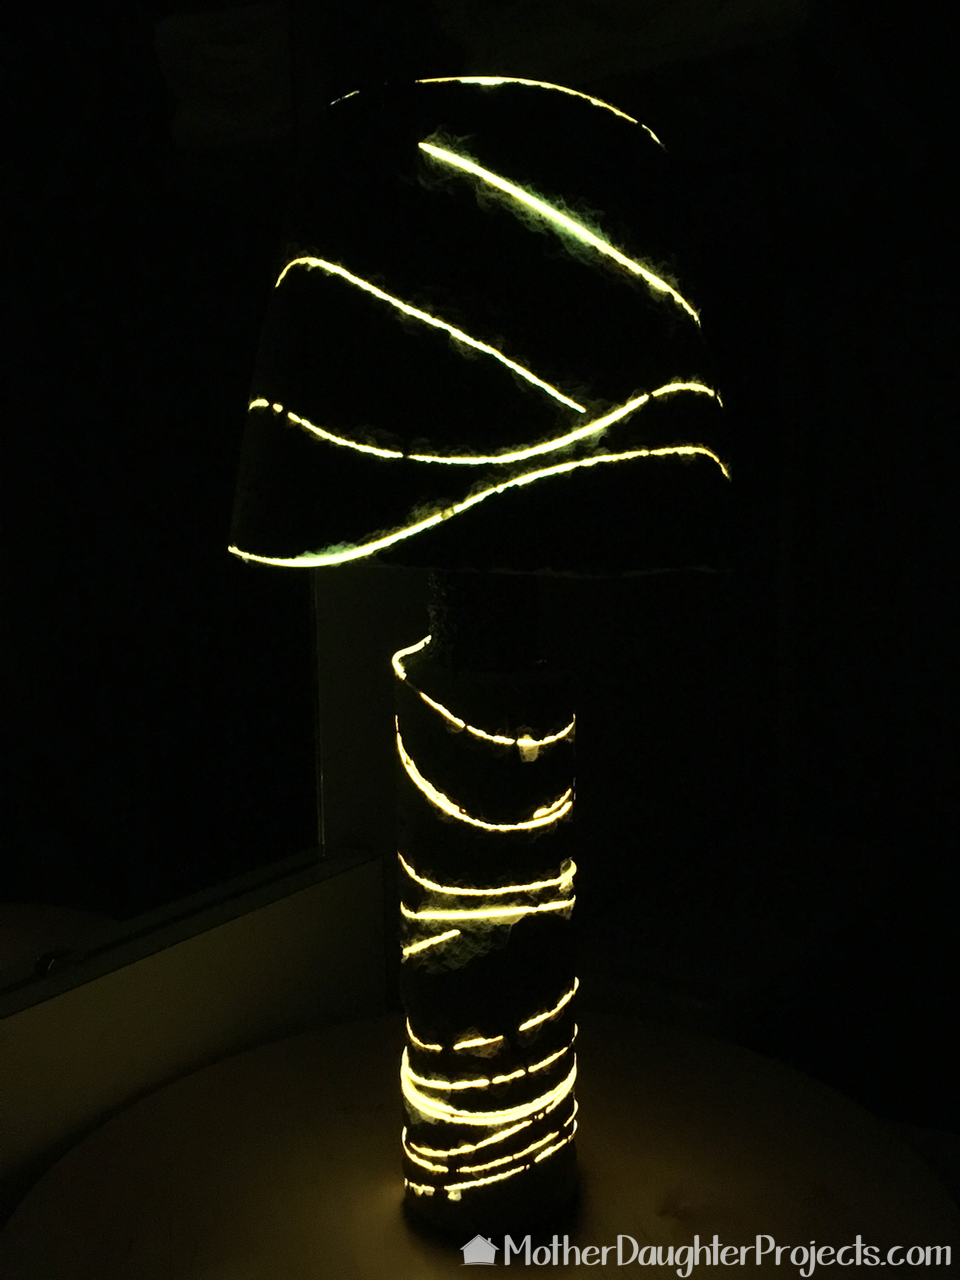 Learn how to cast a concrete lamp using light up el wire. This is inspired by the Wonder Woman movie Lasso of Truth.